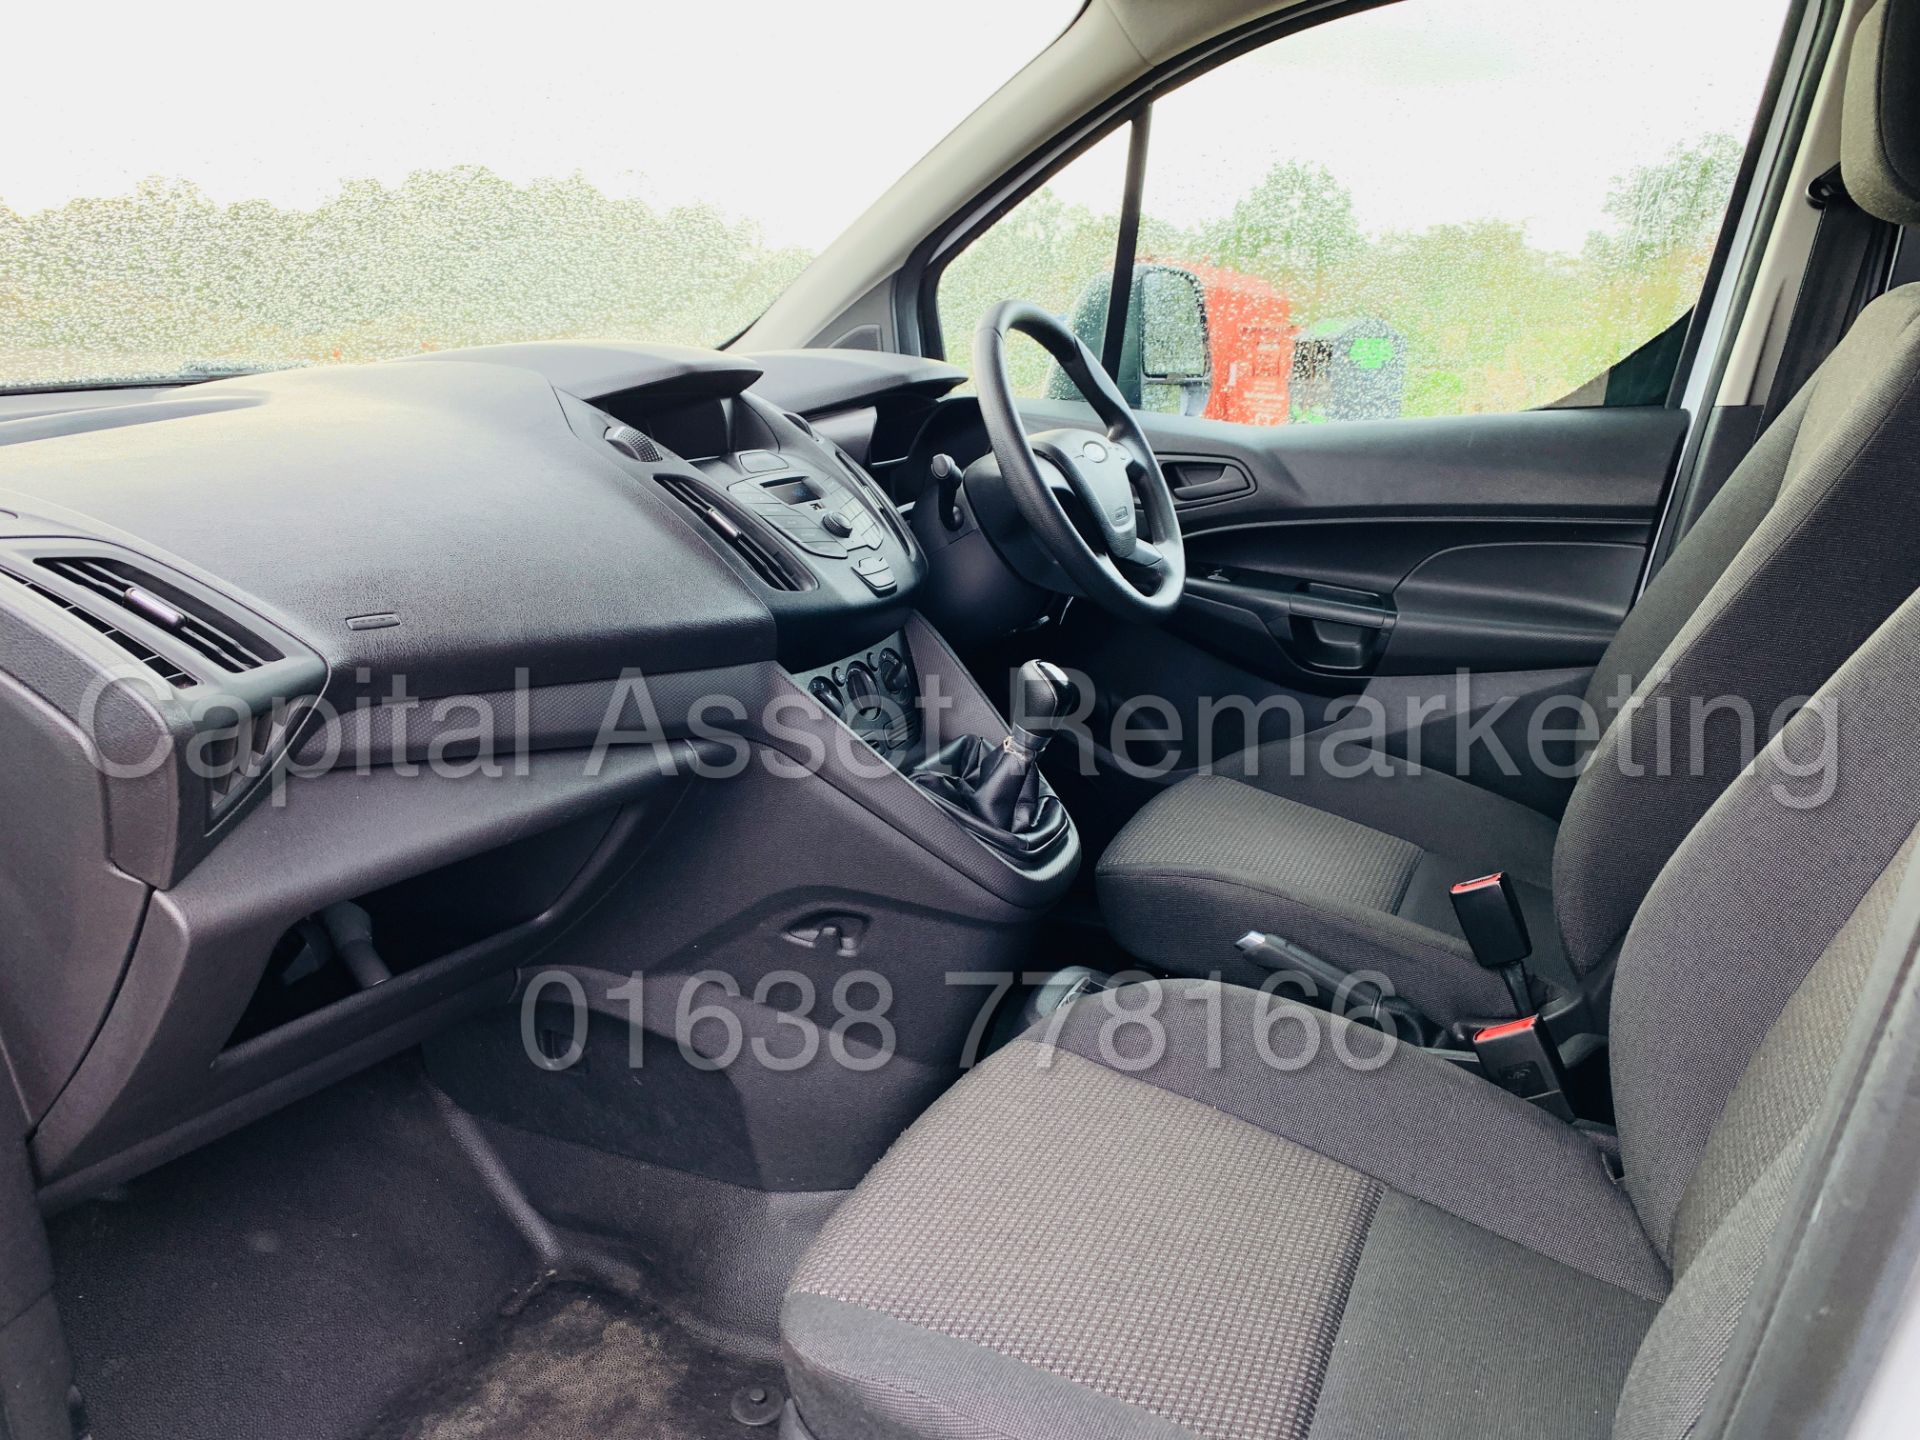 (On Sale) FORD TRANSIT CONNECT 75 T200 *SWB* (67 REG) '1.5 TDCI - EURO 6 COMPLIANT' (1 OWNER) - Image 17 of 36